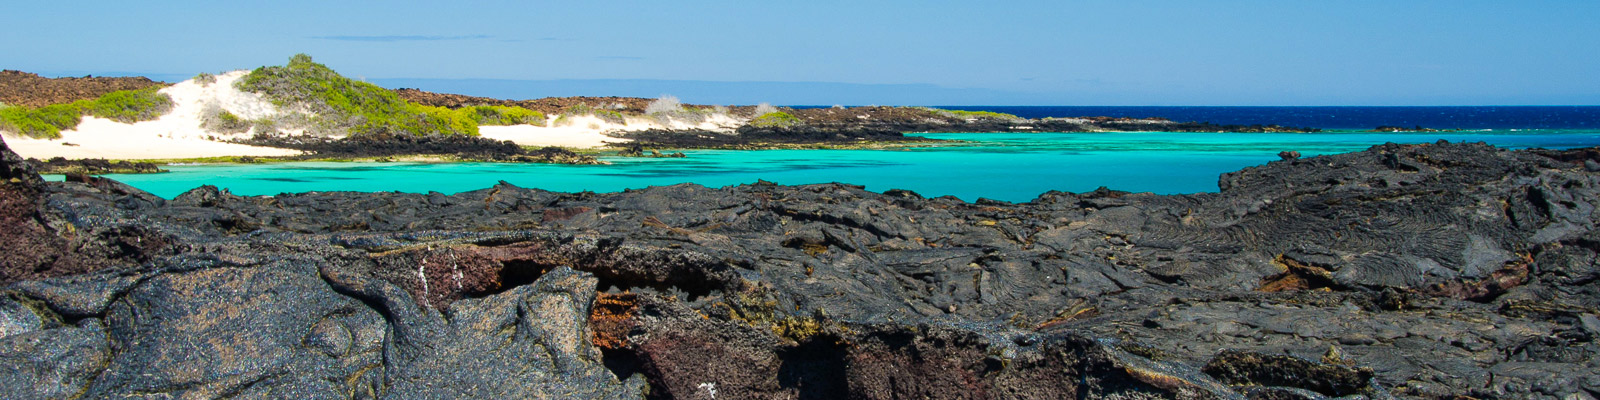 Ecuador The Andes And Land Based Galapagos Luxury Travel Tour